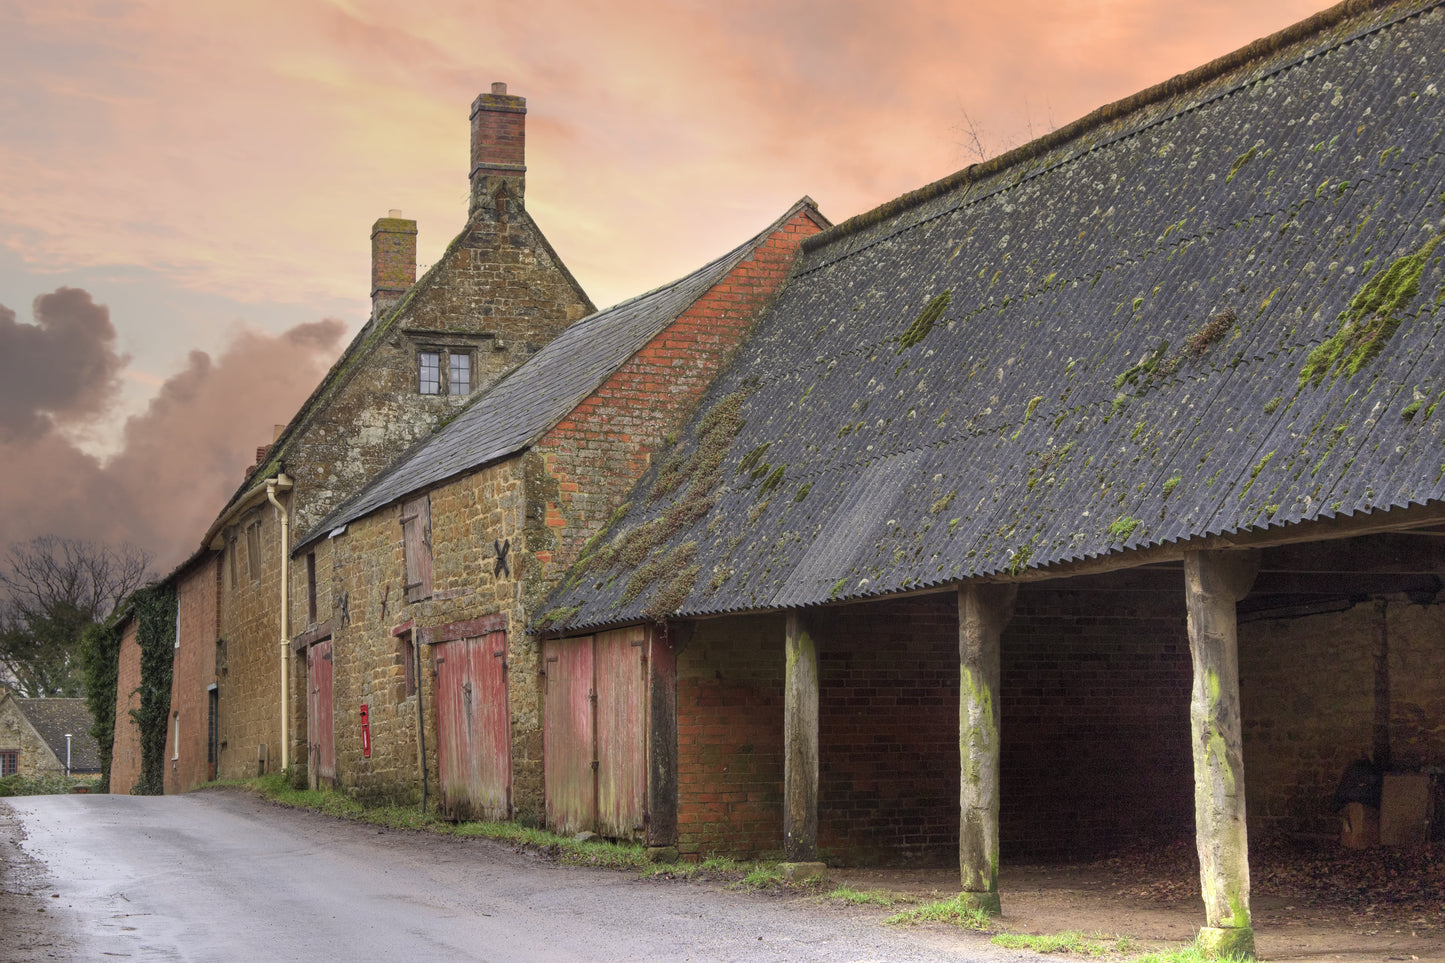 Barn and rural building conversions